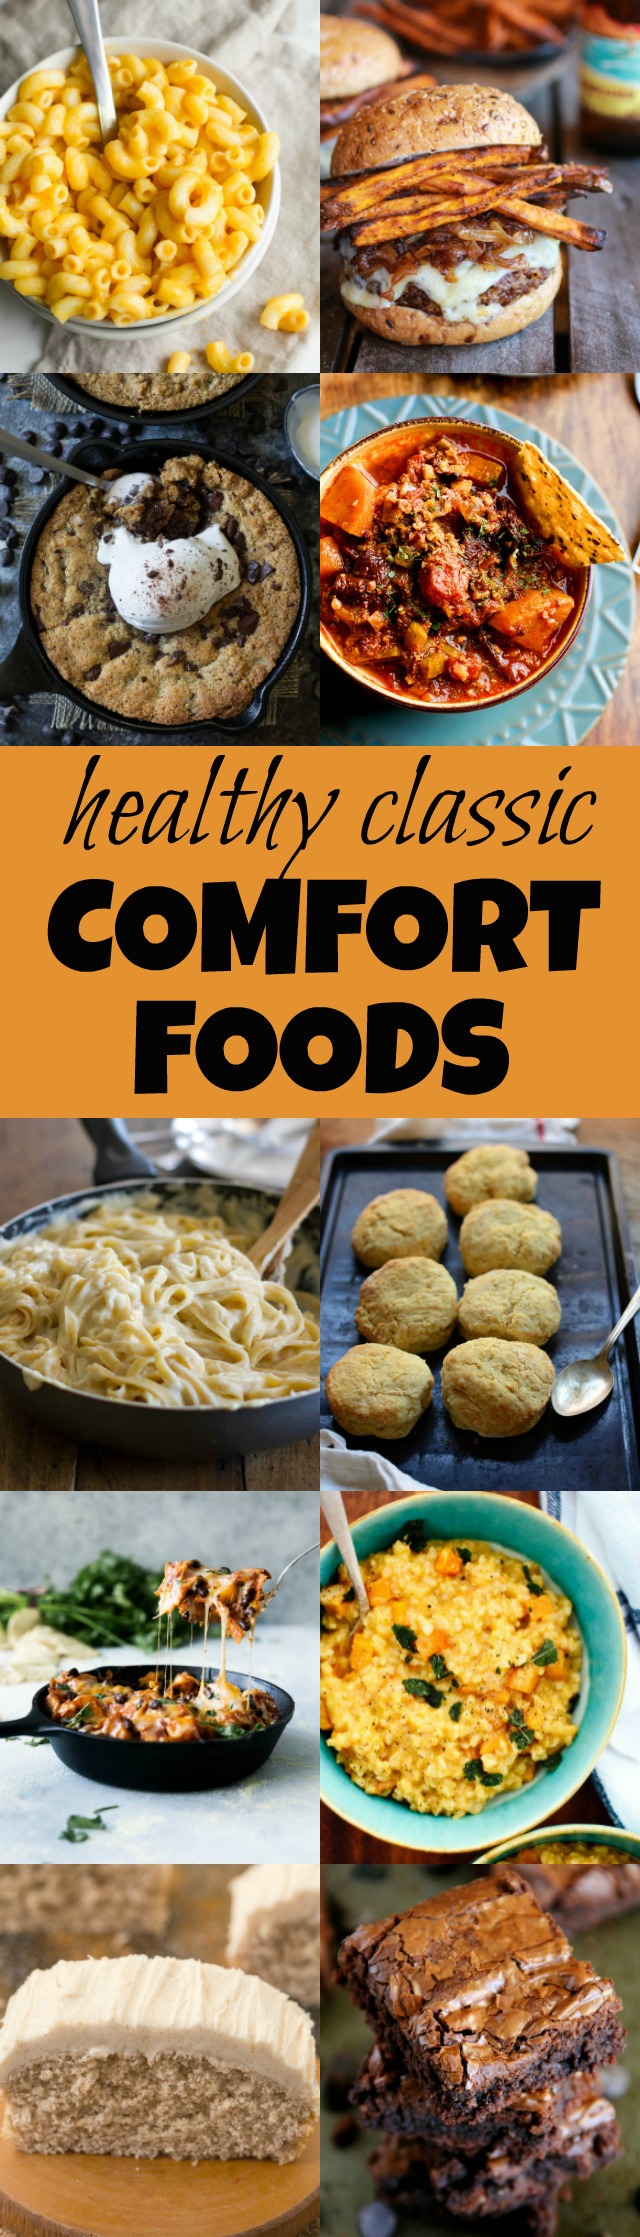 Eating healthy doesn't mean saying goodbye to your favourite comfort foods! These healthier versions of all the classics are great for both the body and soul | runningwithspoons.com